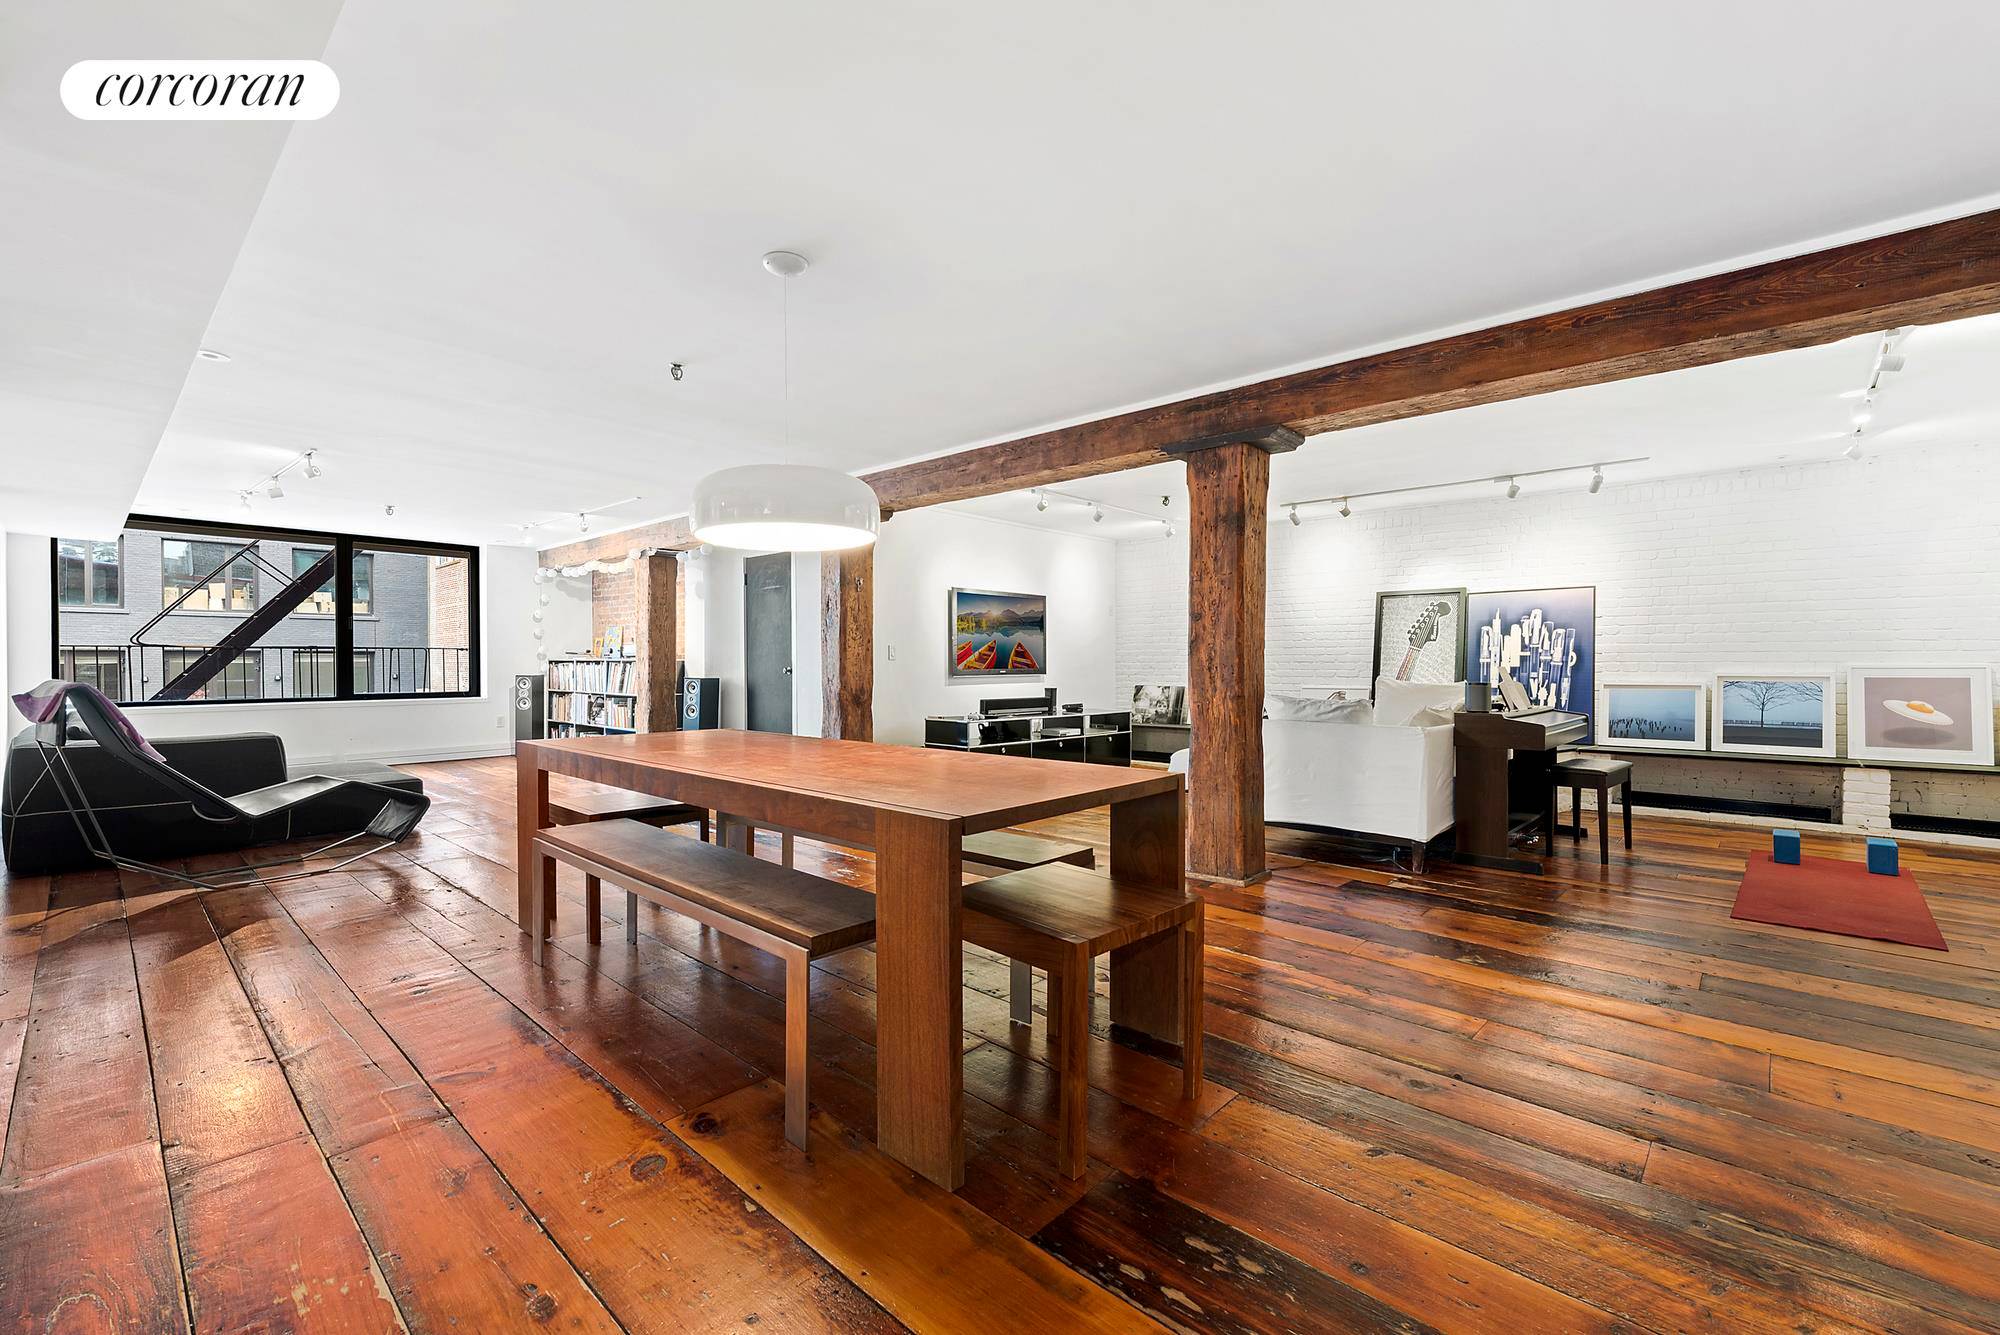 Stunning original loft details and a perfect location just a block from the Hudson make this sprawling three bedroom plus home office, two bathroom loft a must see Tribeca sanctuary.